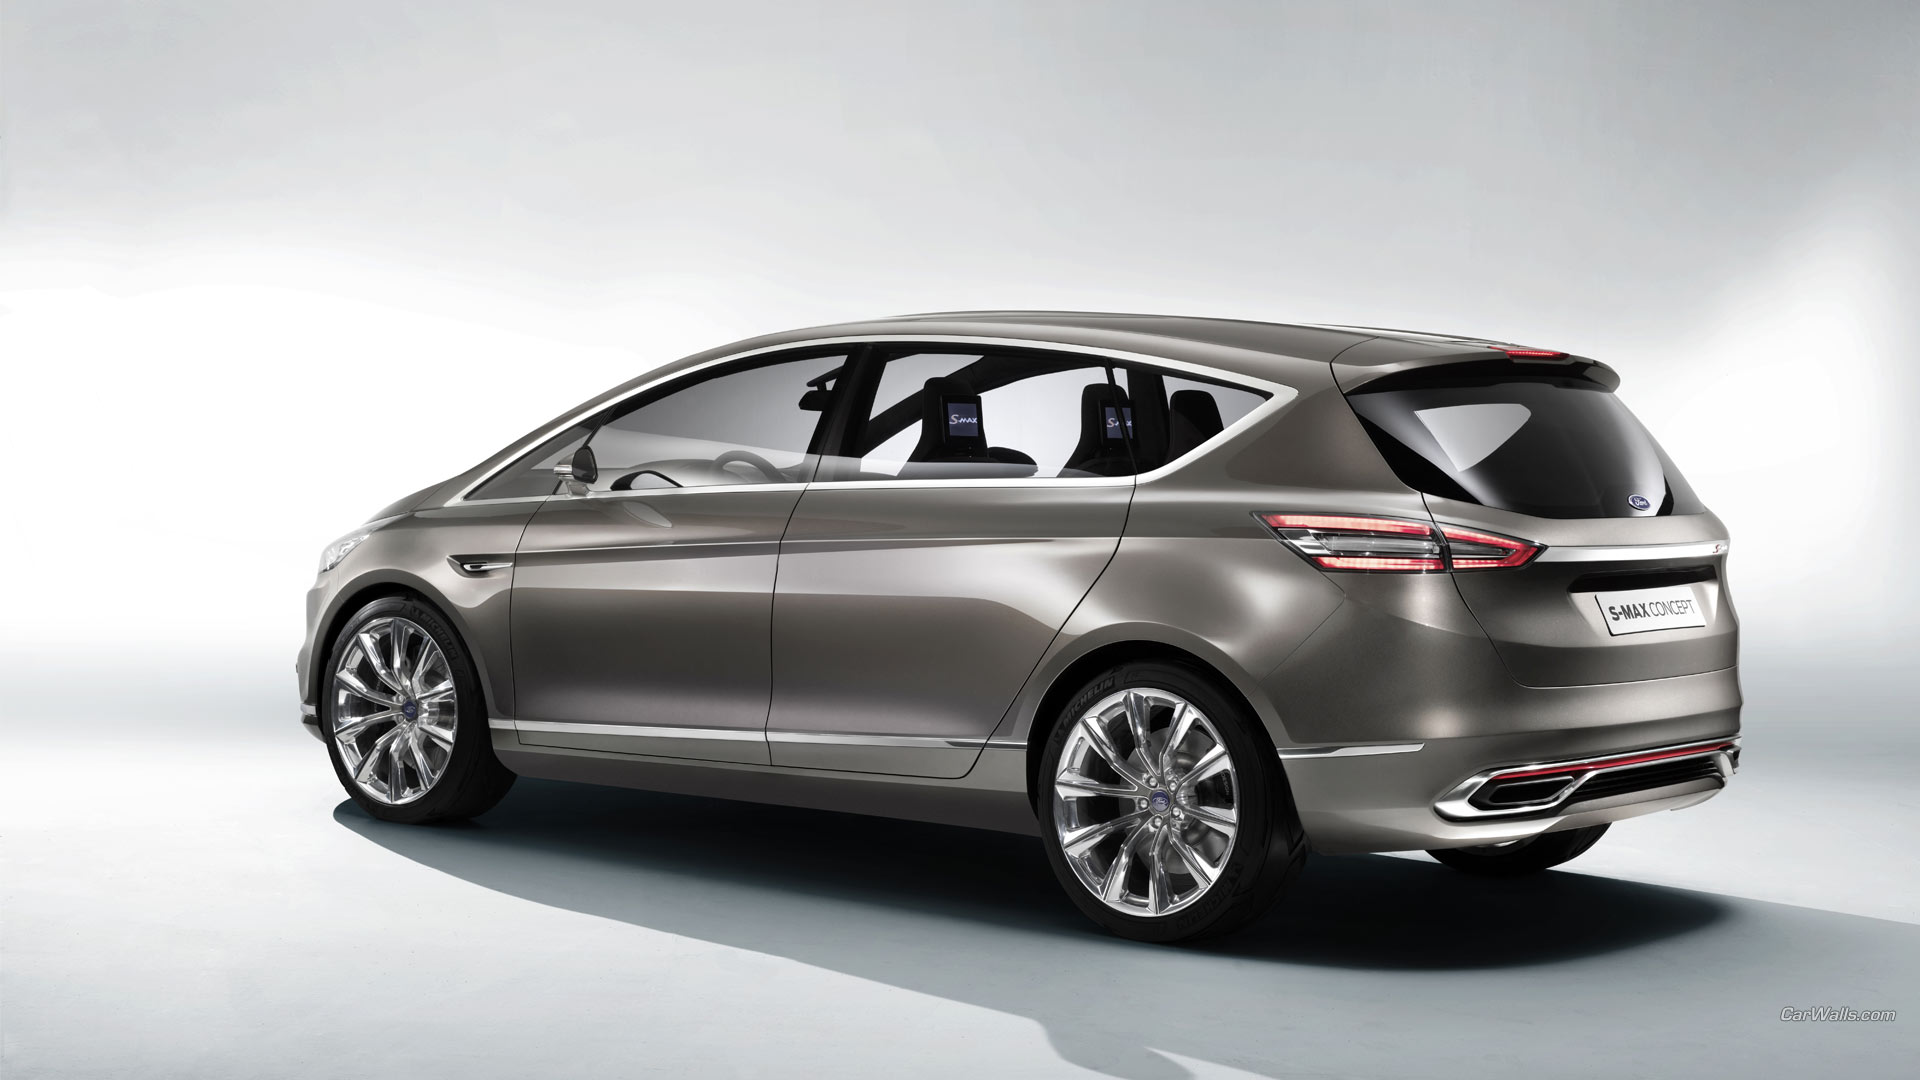 Vehicles 2013 Ford S-MAX Concept HD Wallpaper | Background Image